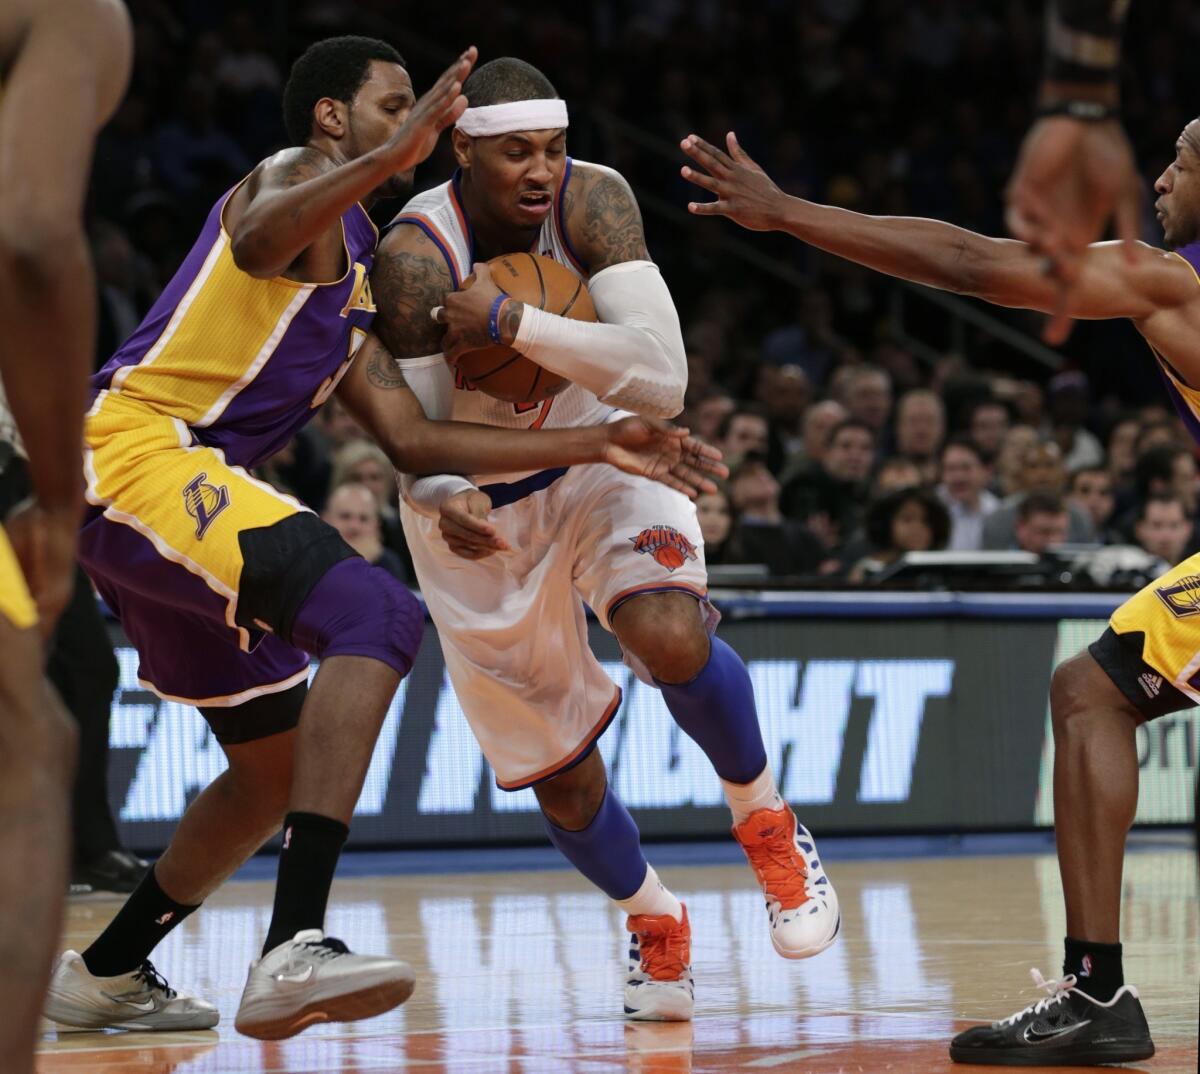 Carmelo Anthony protects the ball as he drives past Los Angeles Lakers forward Devin Ebanks.